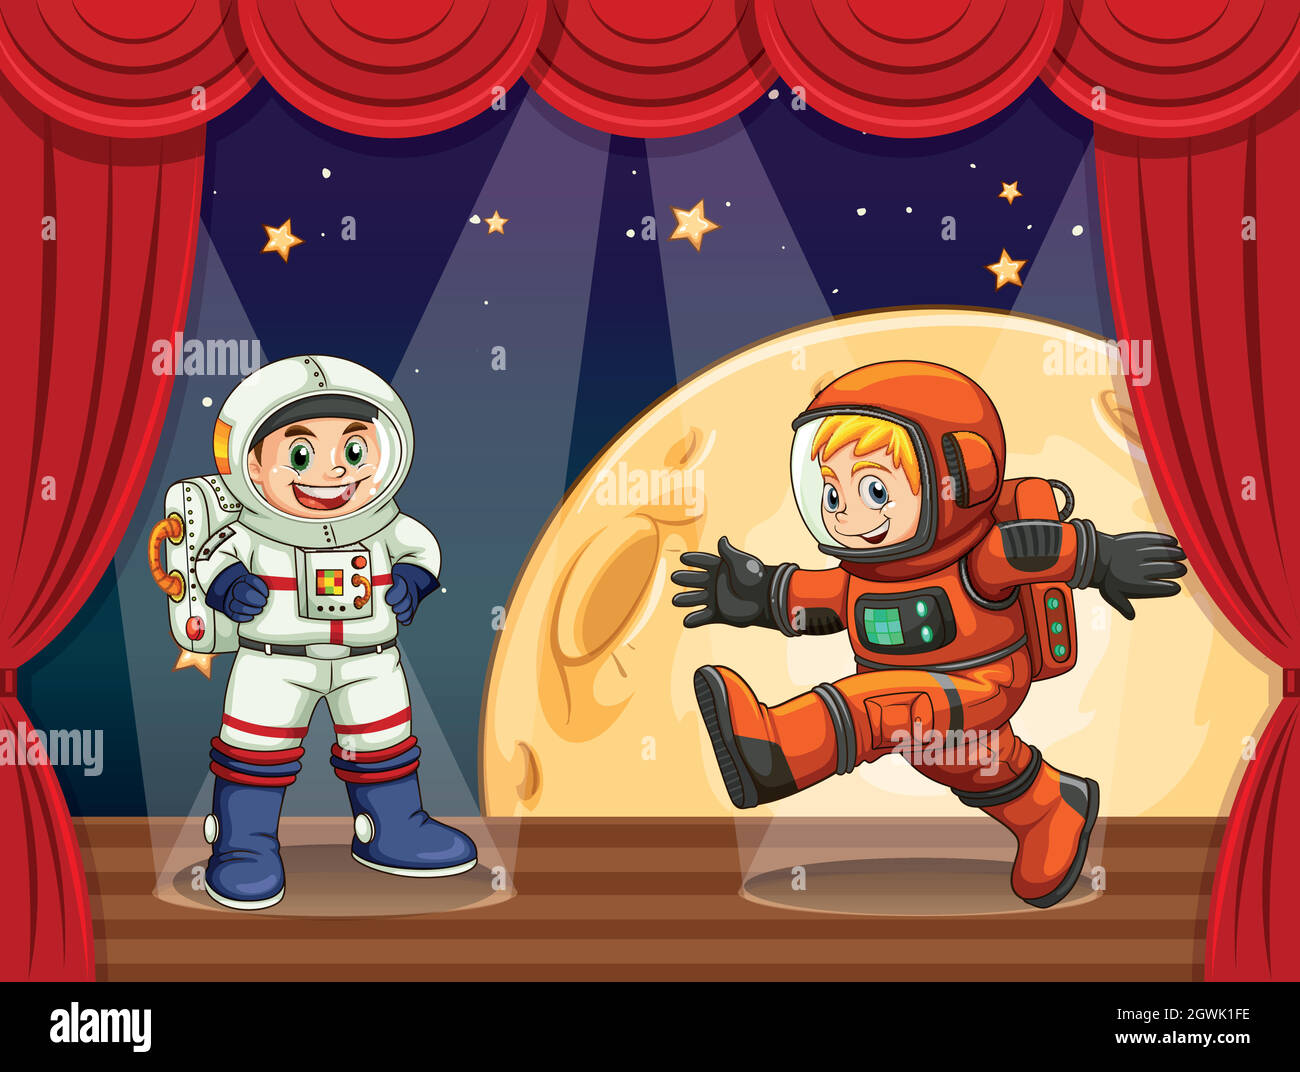 Two astronauts walking on stage Stock Vector